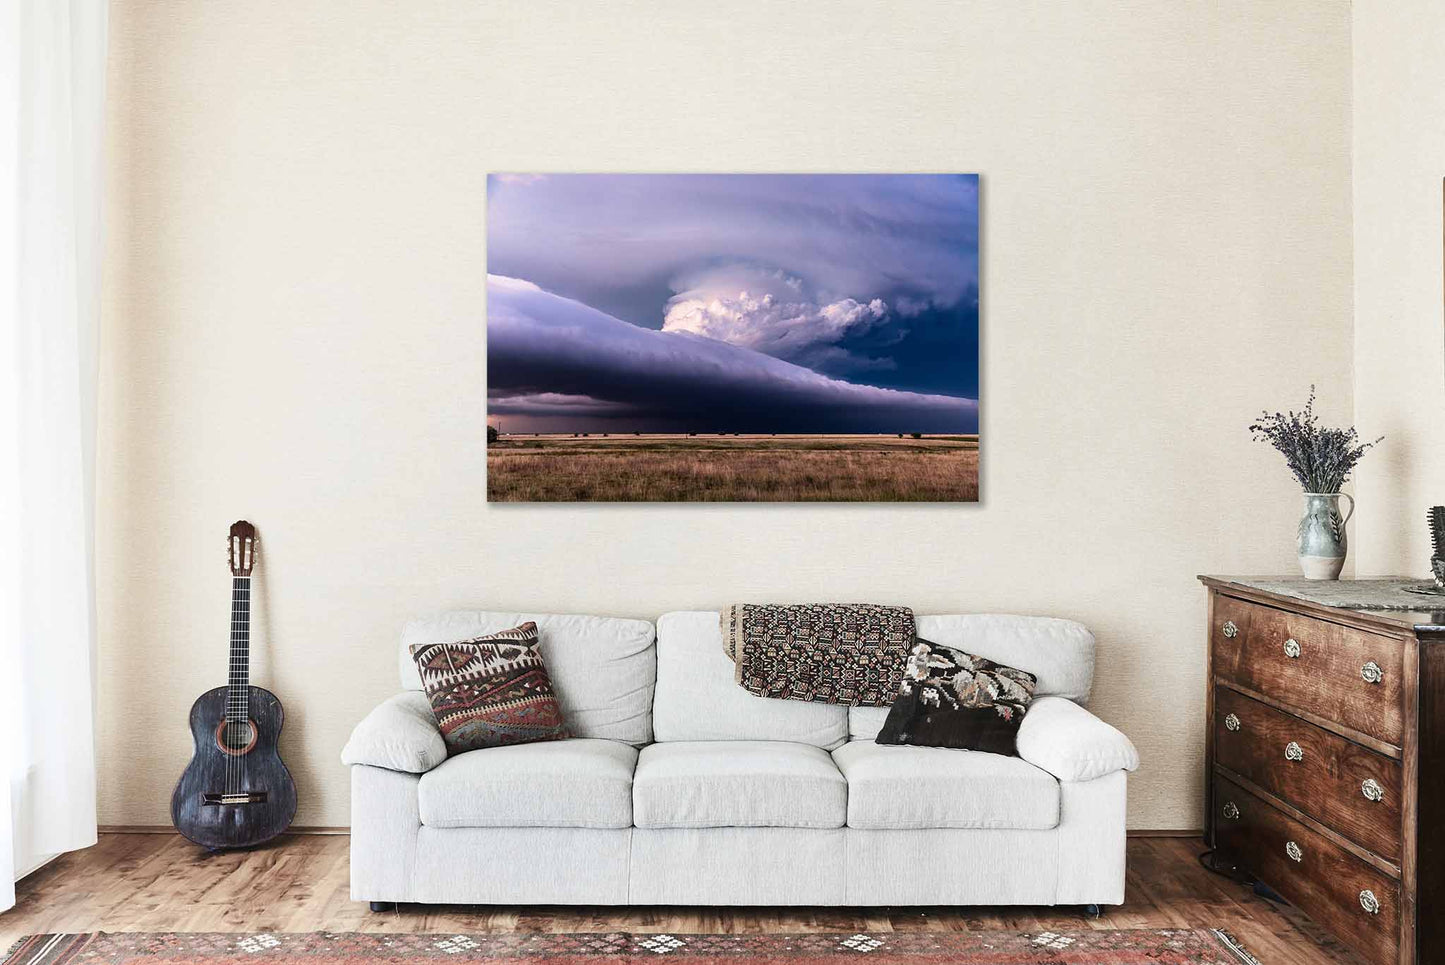 Storm Canvas Wall Art (Ready to Hang) Gallery Wrap of Supercell Thunderstorm Spanning Horizon on Stormy Day in Texas Weather Photography Nature Decor